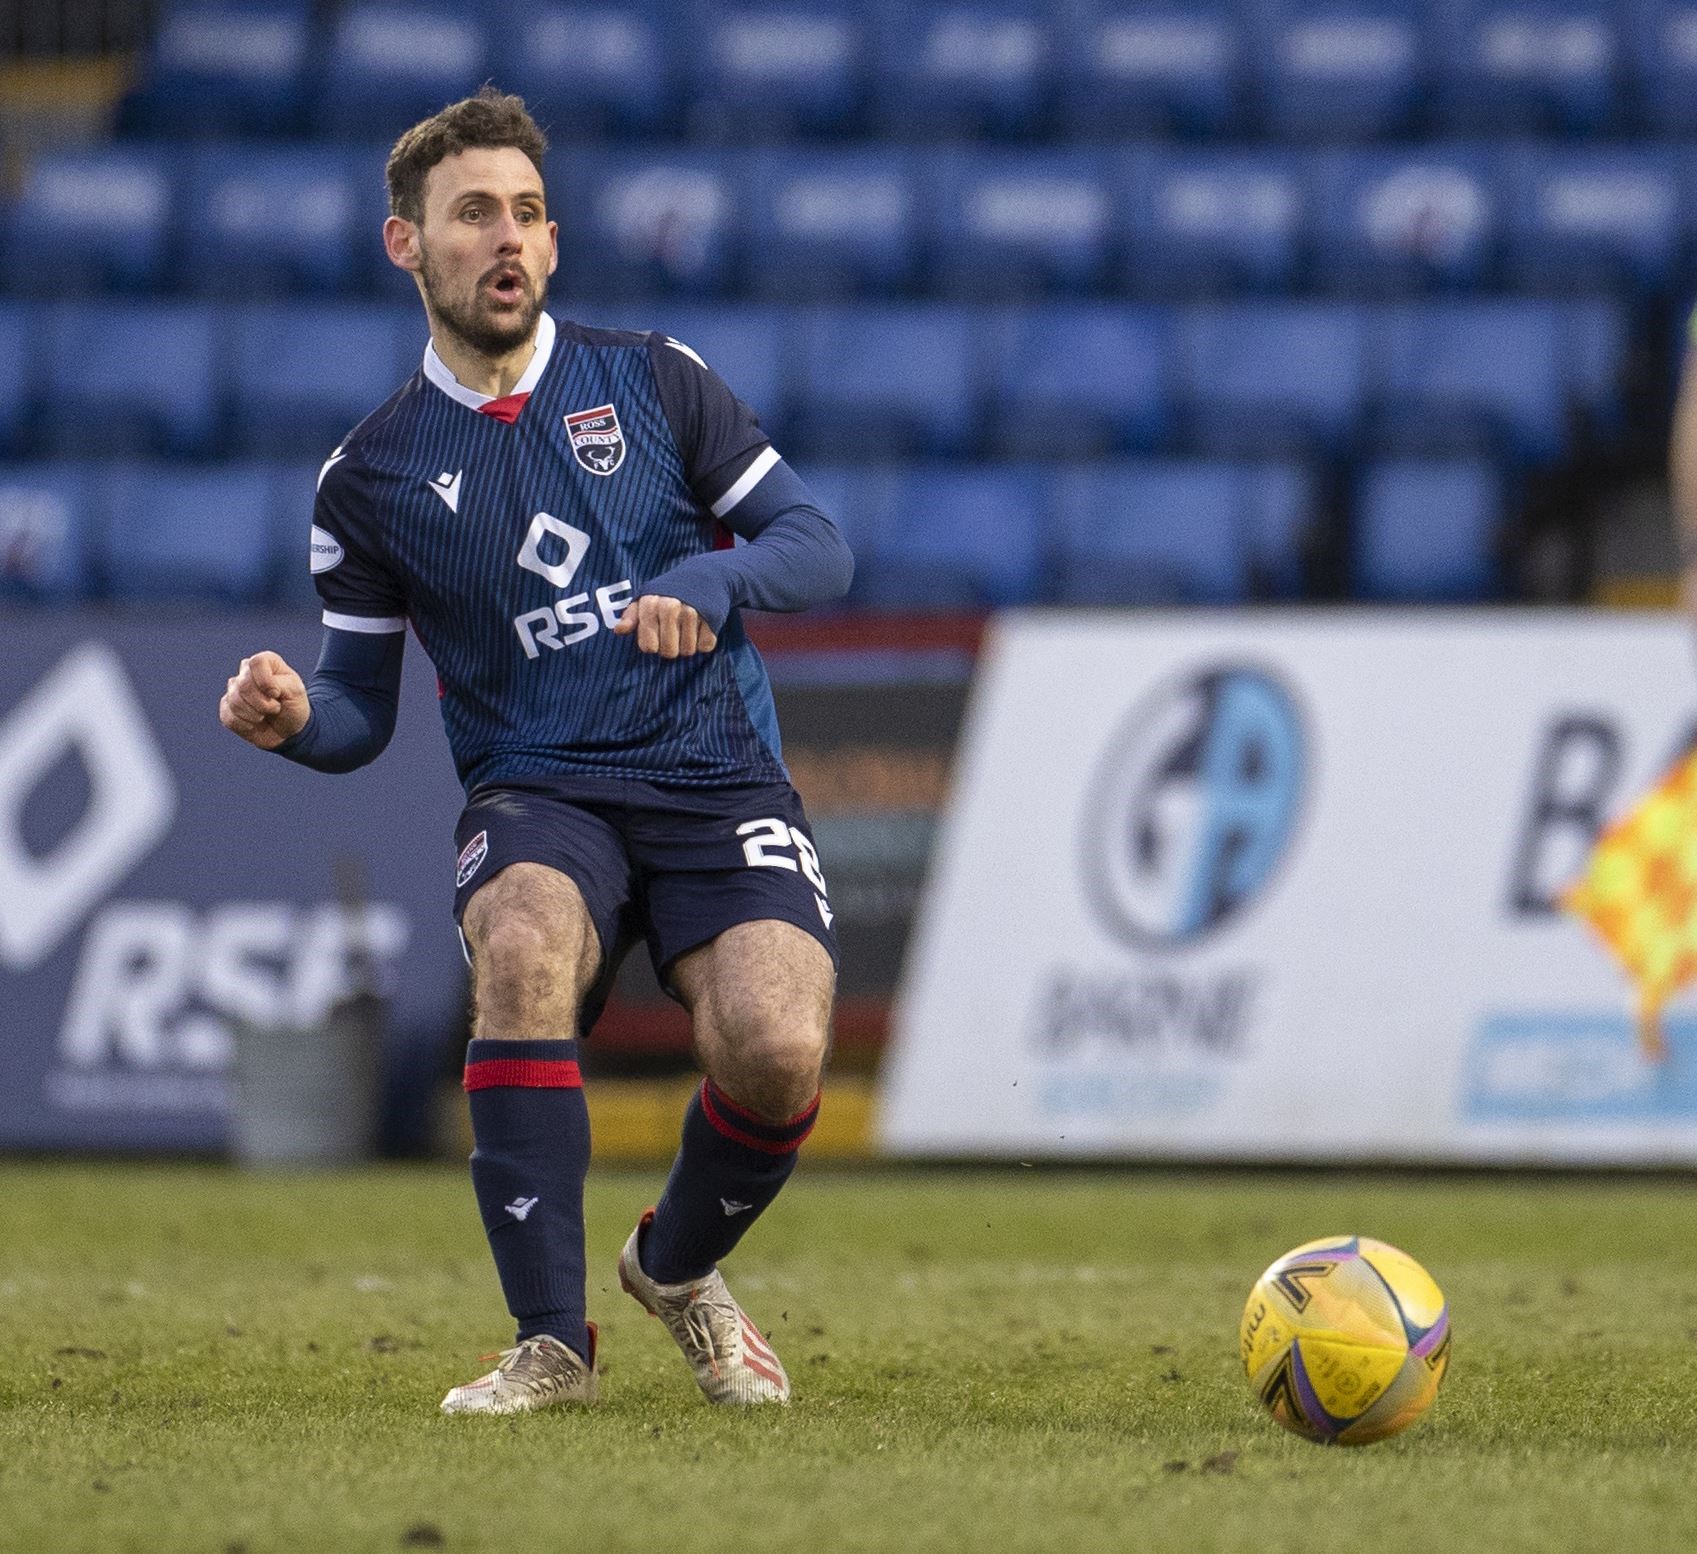 Picture - Ken Macpherson, Inverness. Ross County(0) v Dundee Utd(2). 06/02/21. Ross County's Tony Andreu.